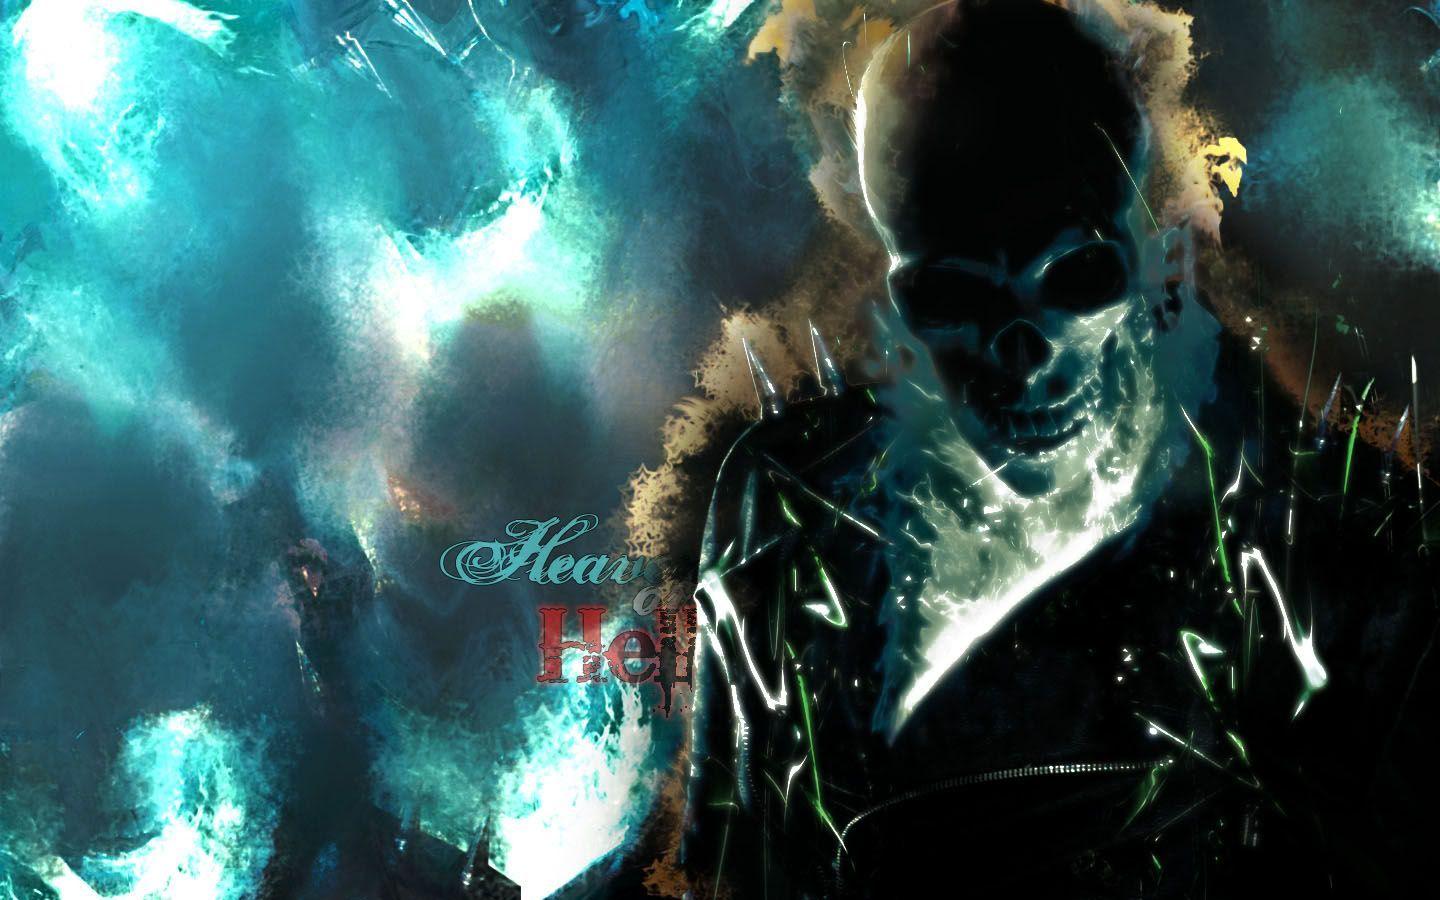 Ghost Rider Wallpaper. Ghost Rider Background and Image 49